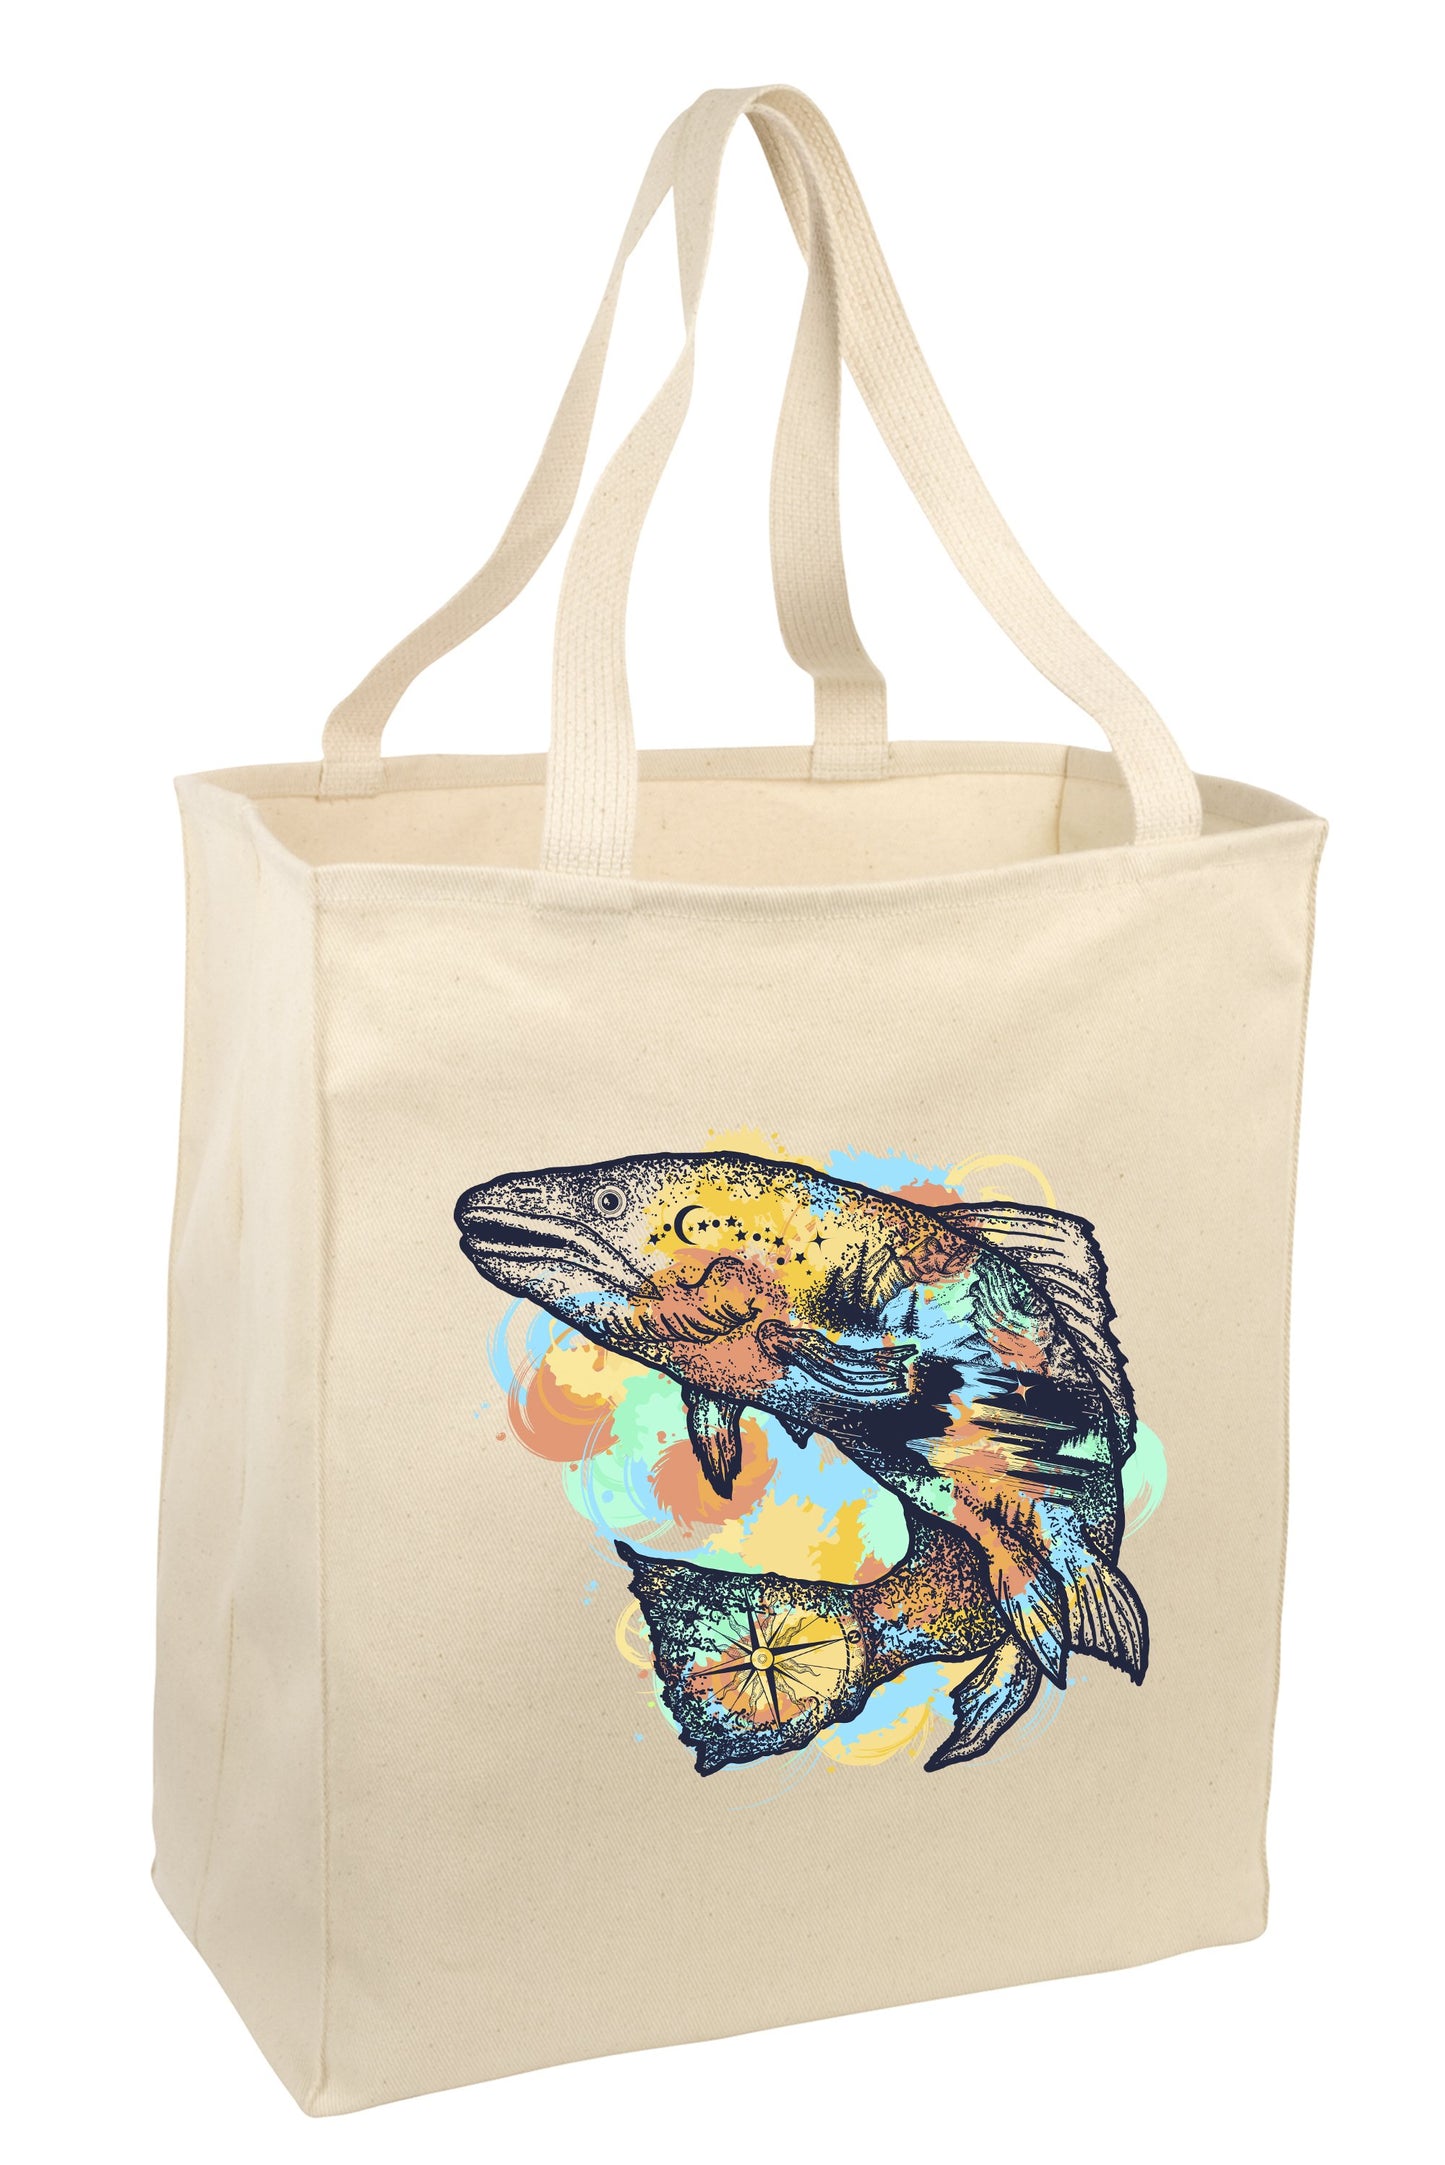 Over the Shoulder Beach Summer Tote Bag. Durable 100% Cotton and 22" Long Handle Shopping Bag. (Trout Fish)